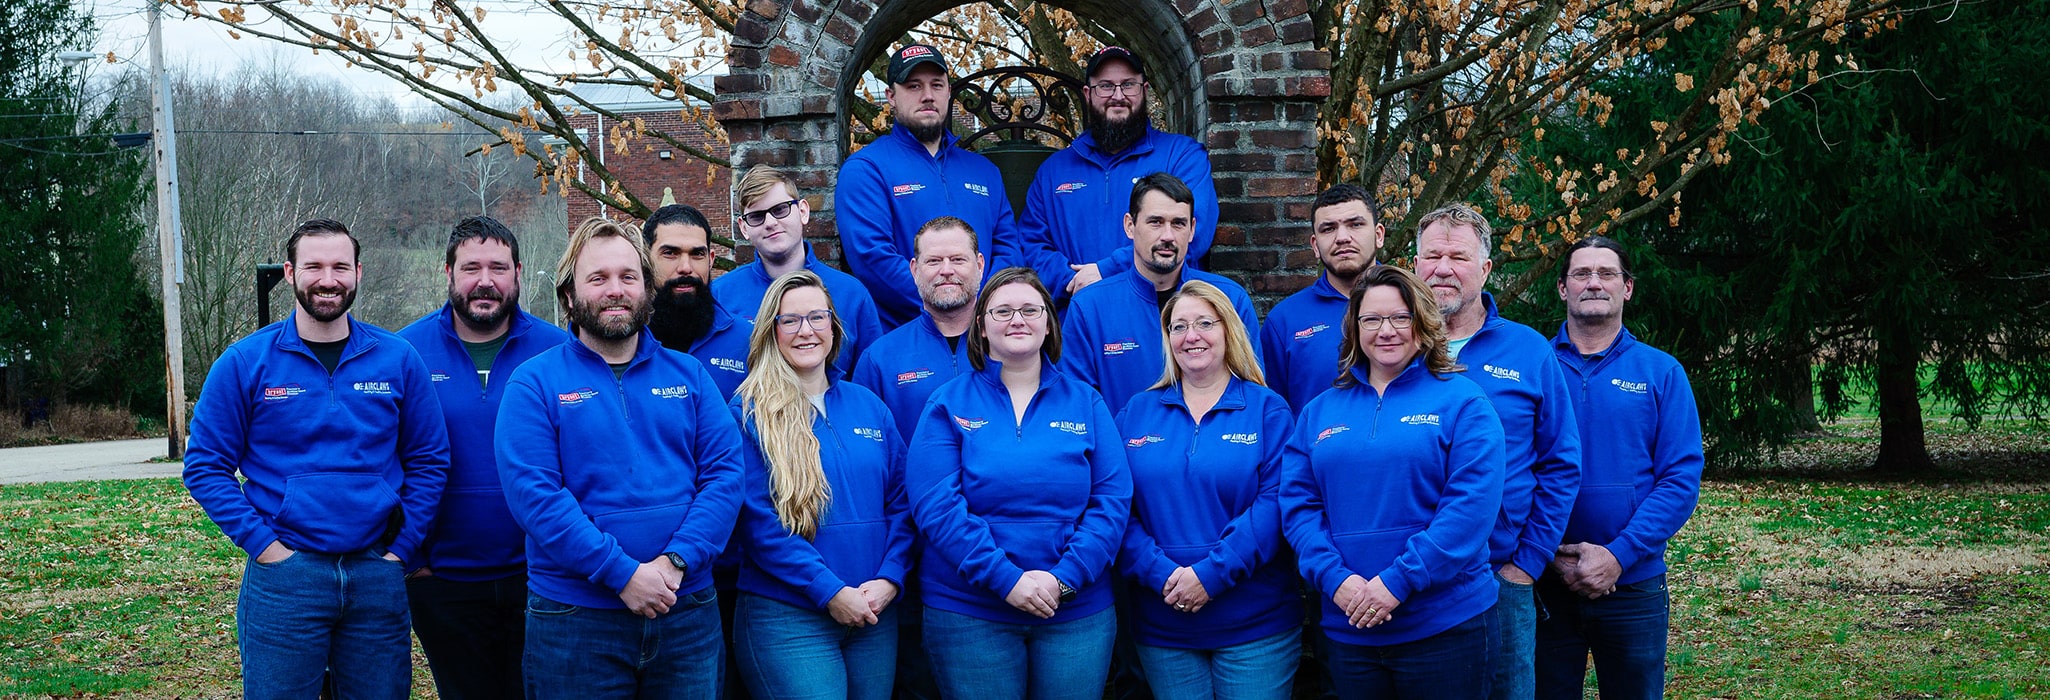 Airclaws HVAC service team in Athens, OH.